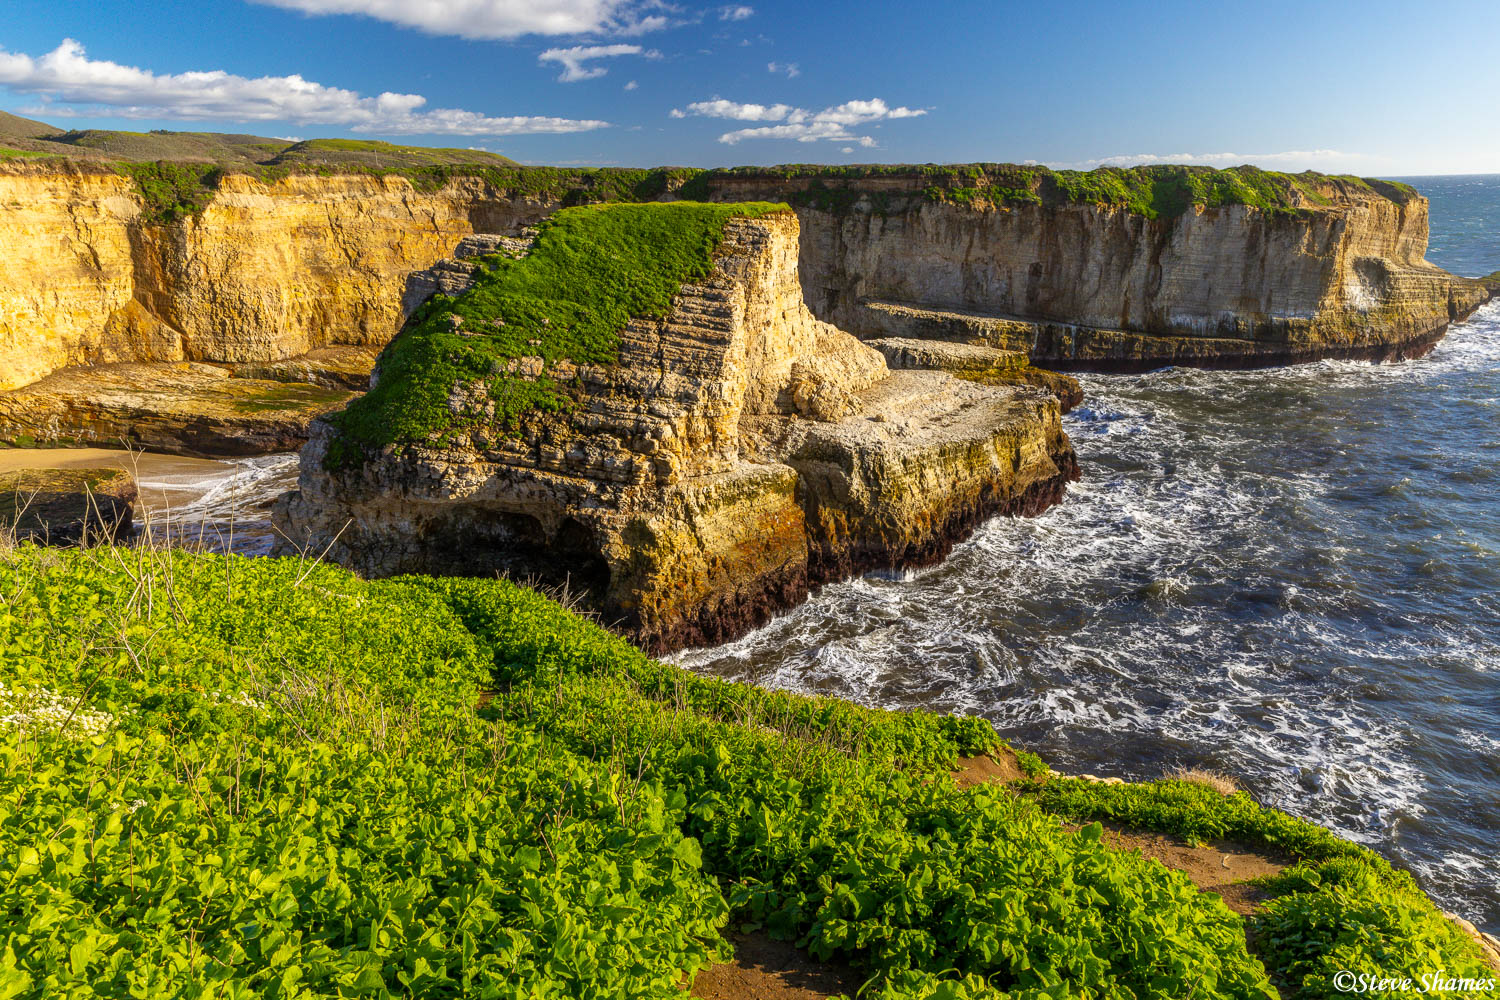 This spot is known as "Shark Fin Cove" That rock in the middle kind of resembles a sharks fin at the right angle.